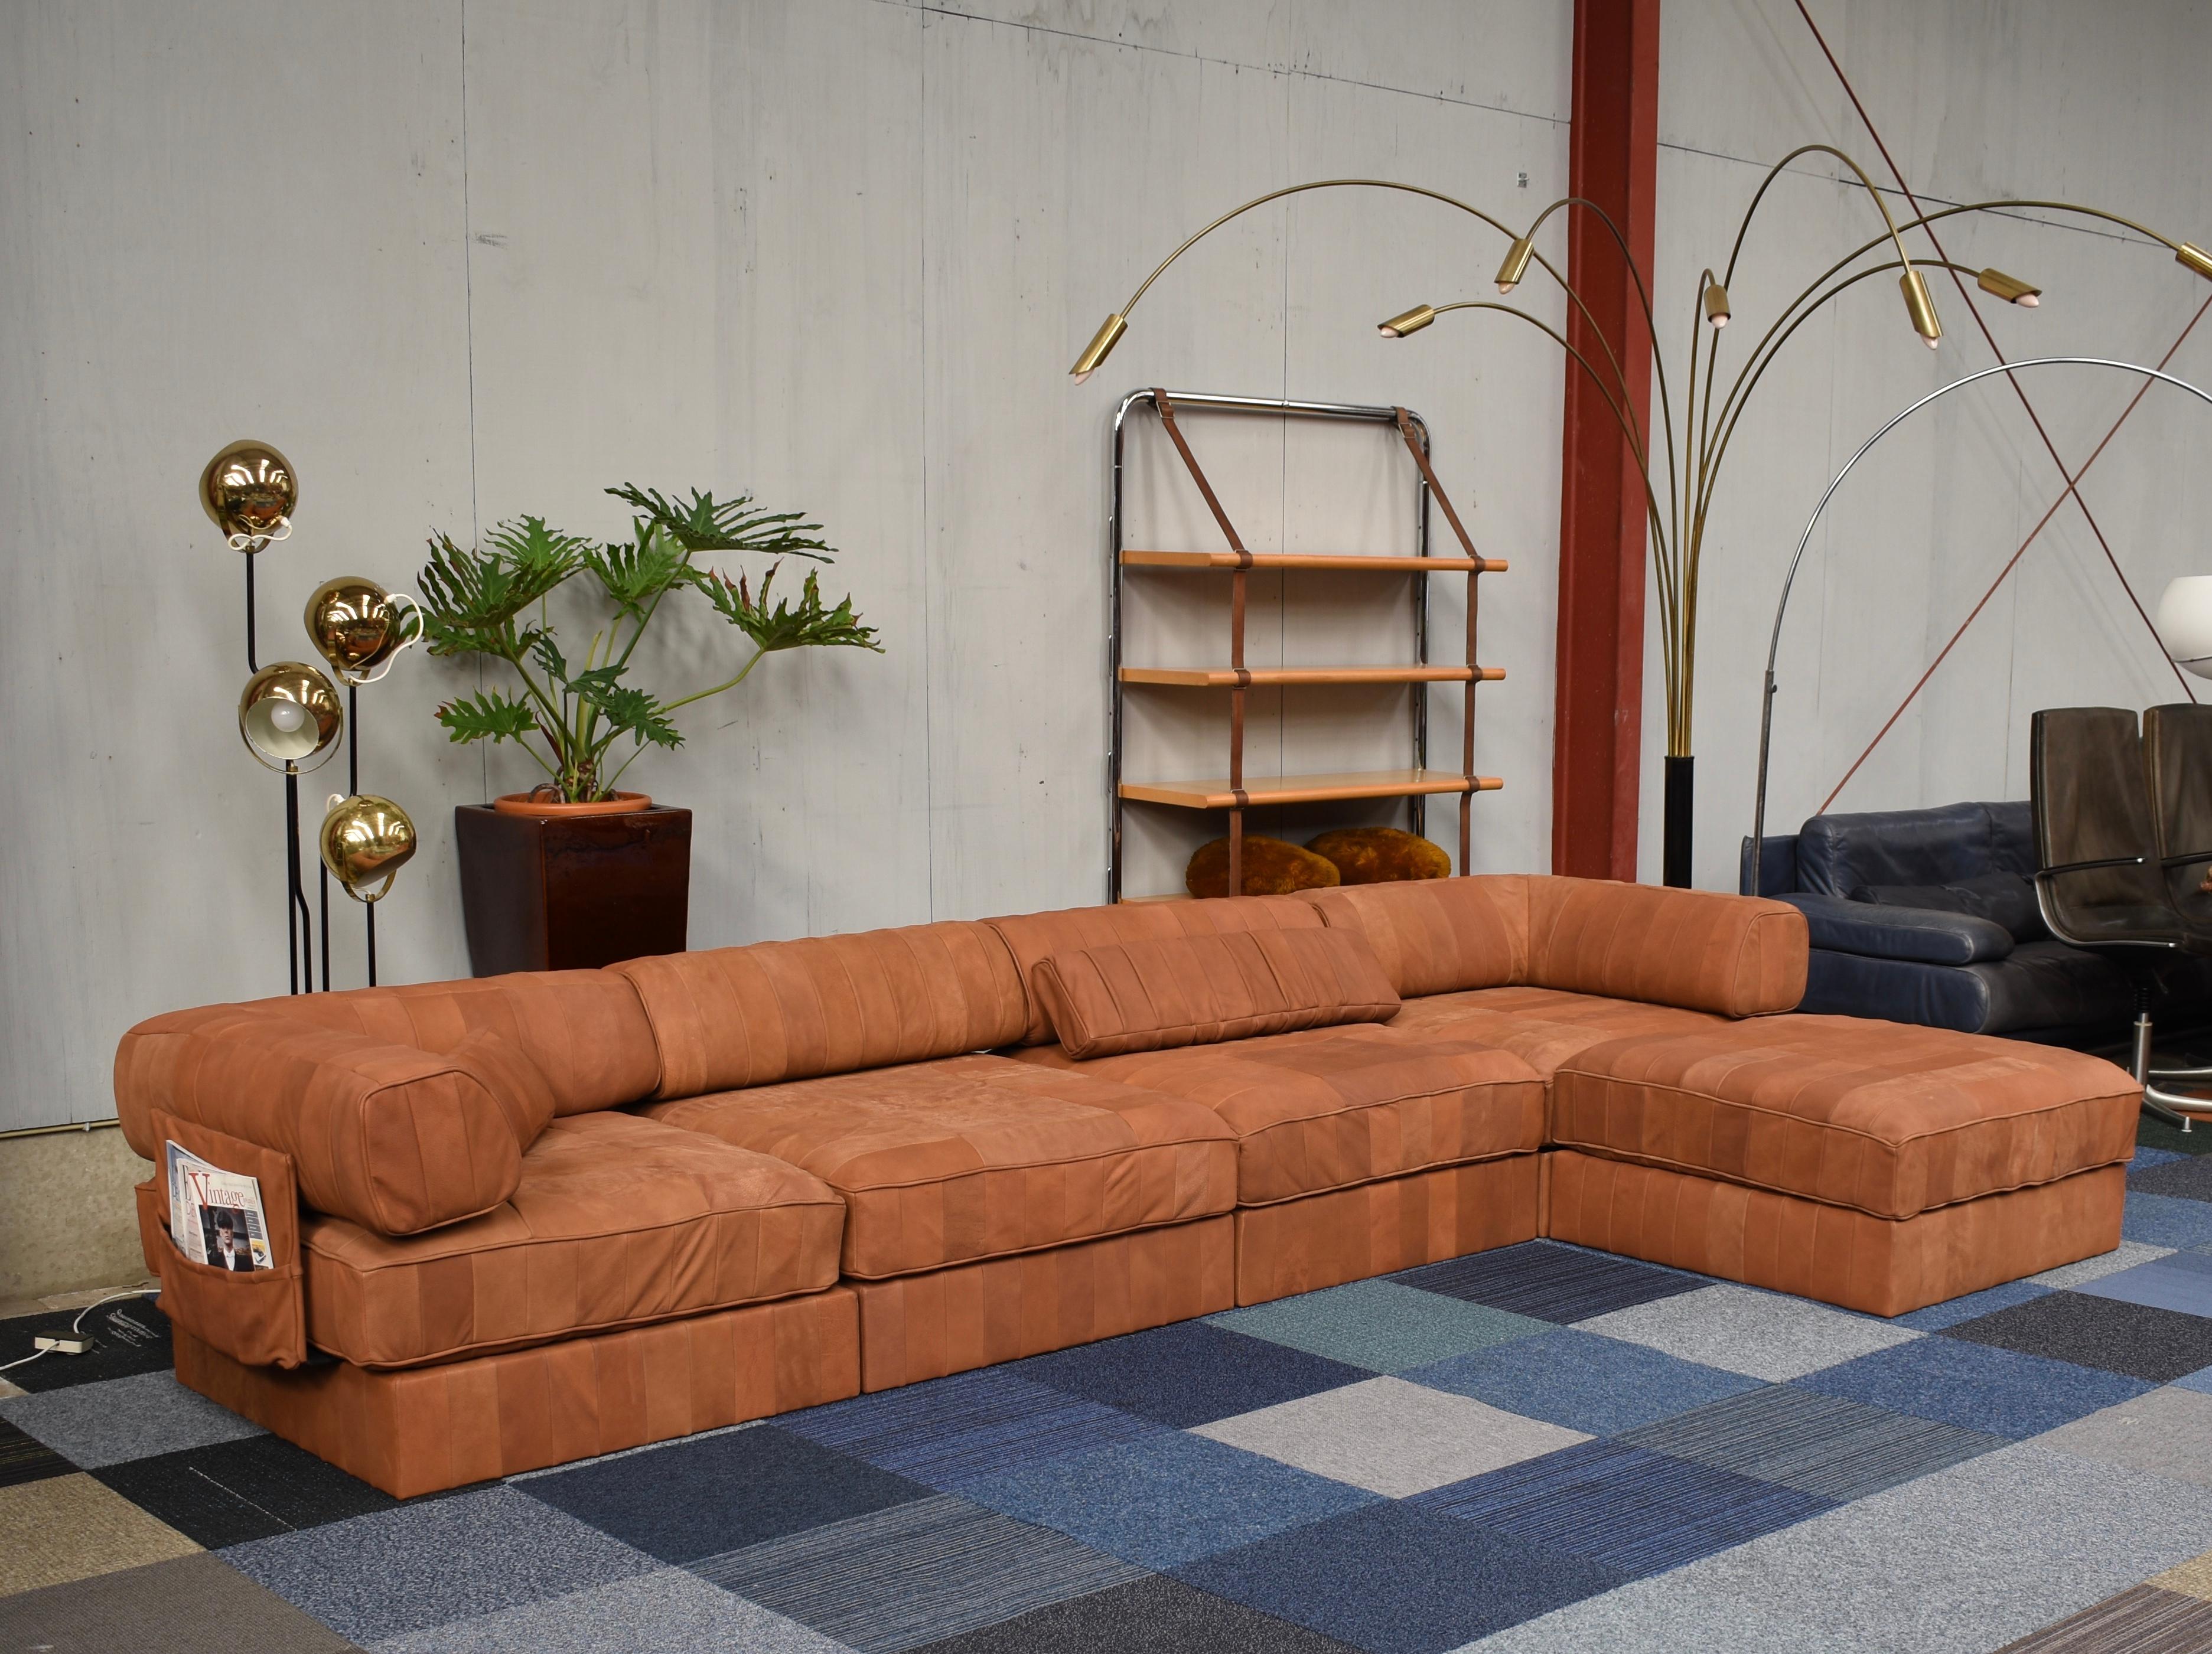 New upholstered sectional patchwork sofa by De Sede, model DS88. The sofa is made of a couple of thousand handcut leather patches. If more elements are needed to expand the sofa this is possible.
The sofa features:
- 5 bases
- 5 seat cushions
-